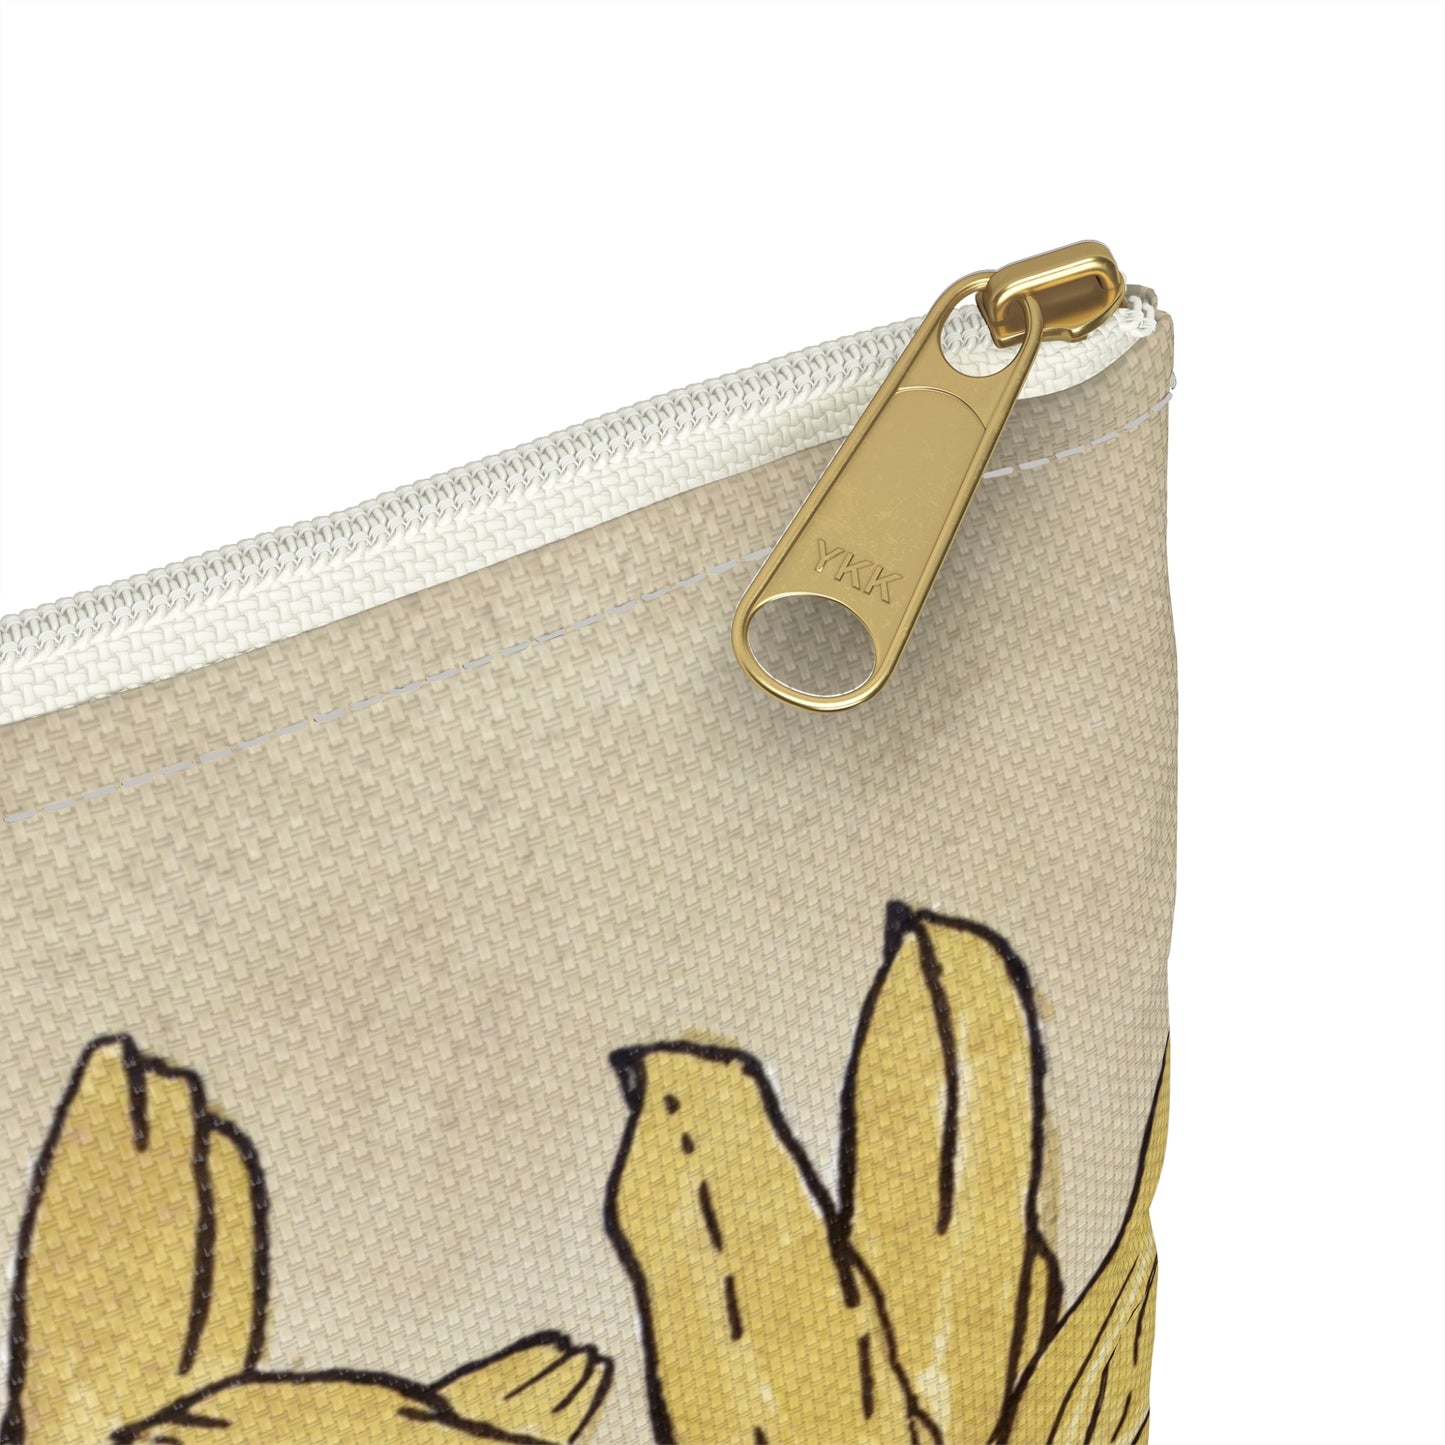 Illustrated Botanica Accessory Pouch